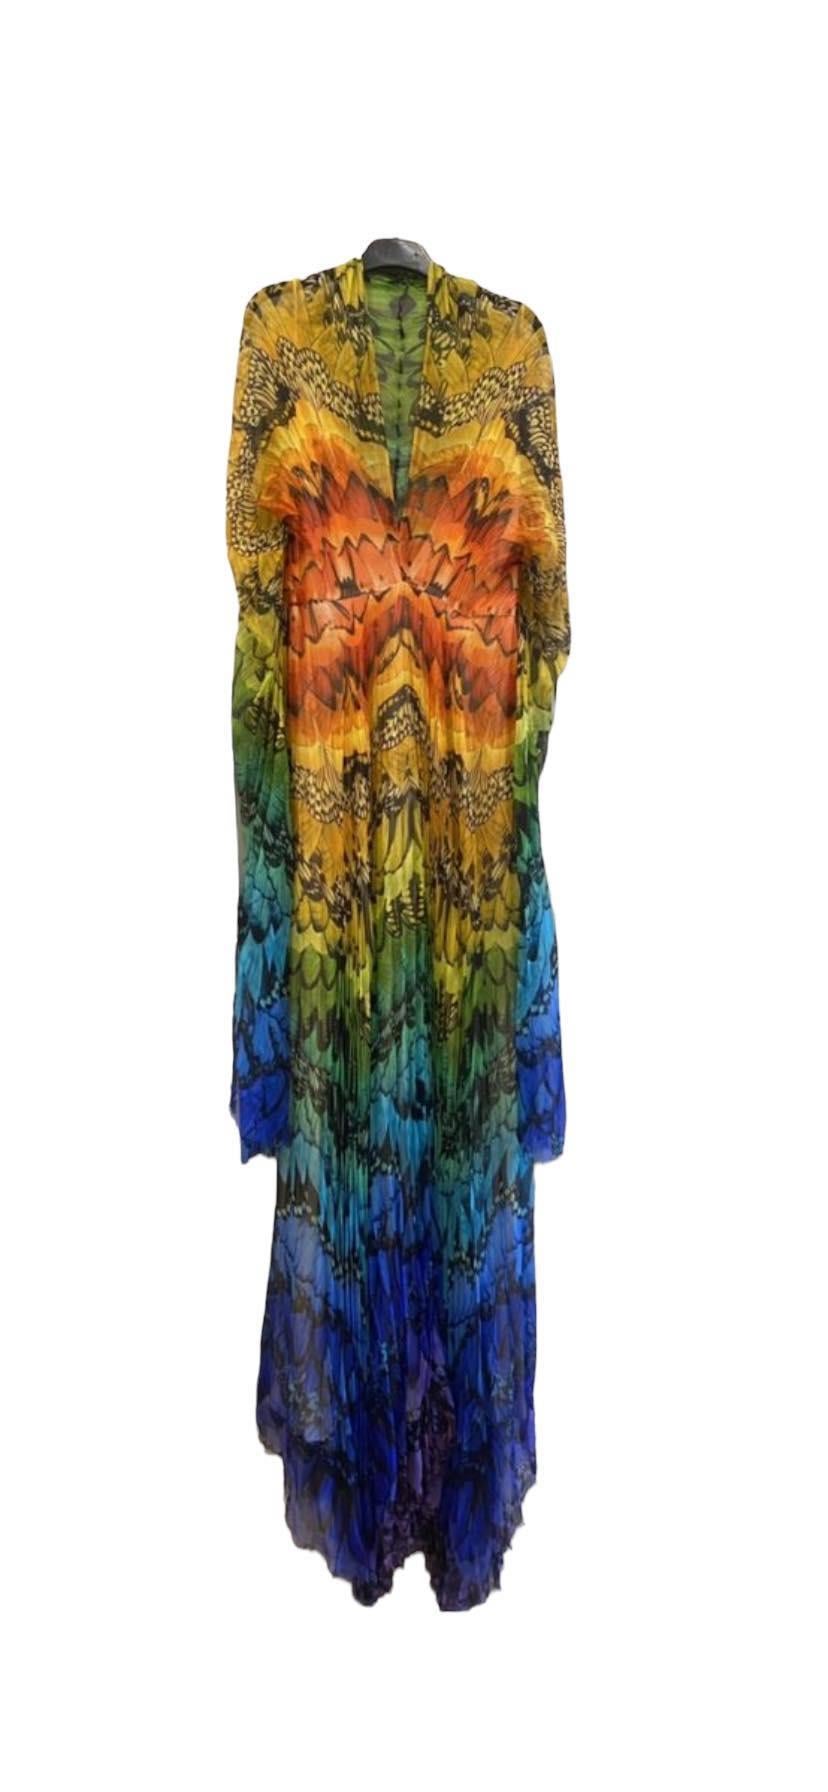 2008 Iconic Vintage Alexander McQueen printed chiffon 'Butterfly' dress
100% Silk
Made in Italy
IT Size 40 - US 40
Excellent condition